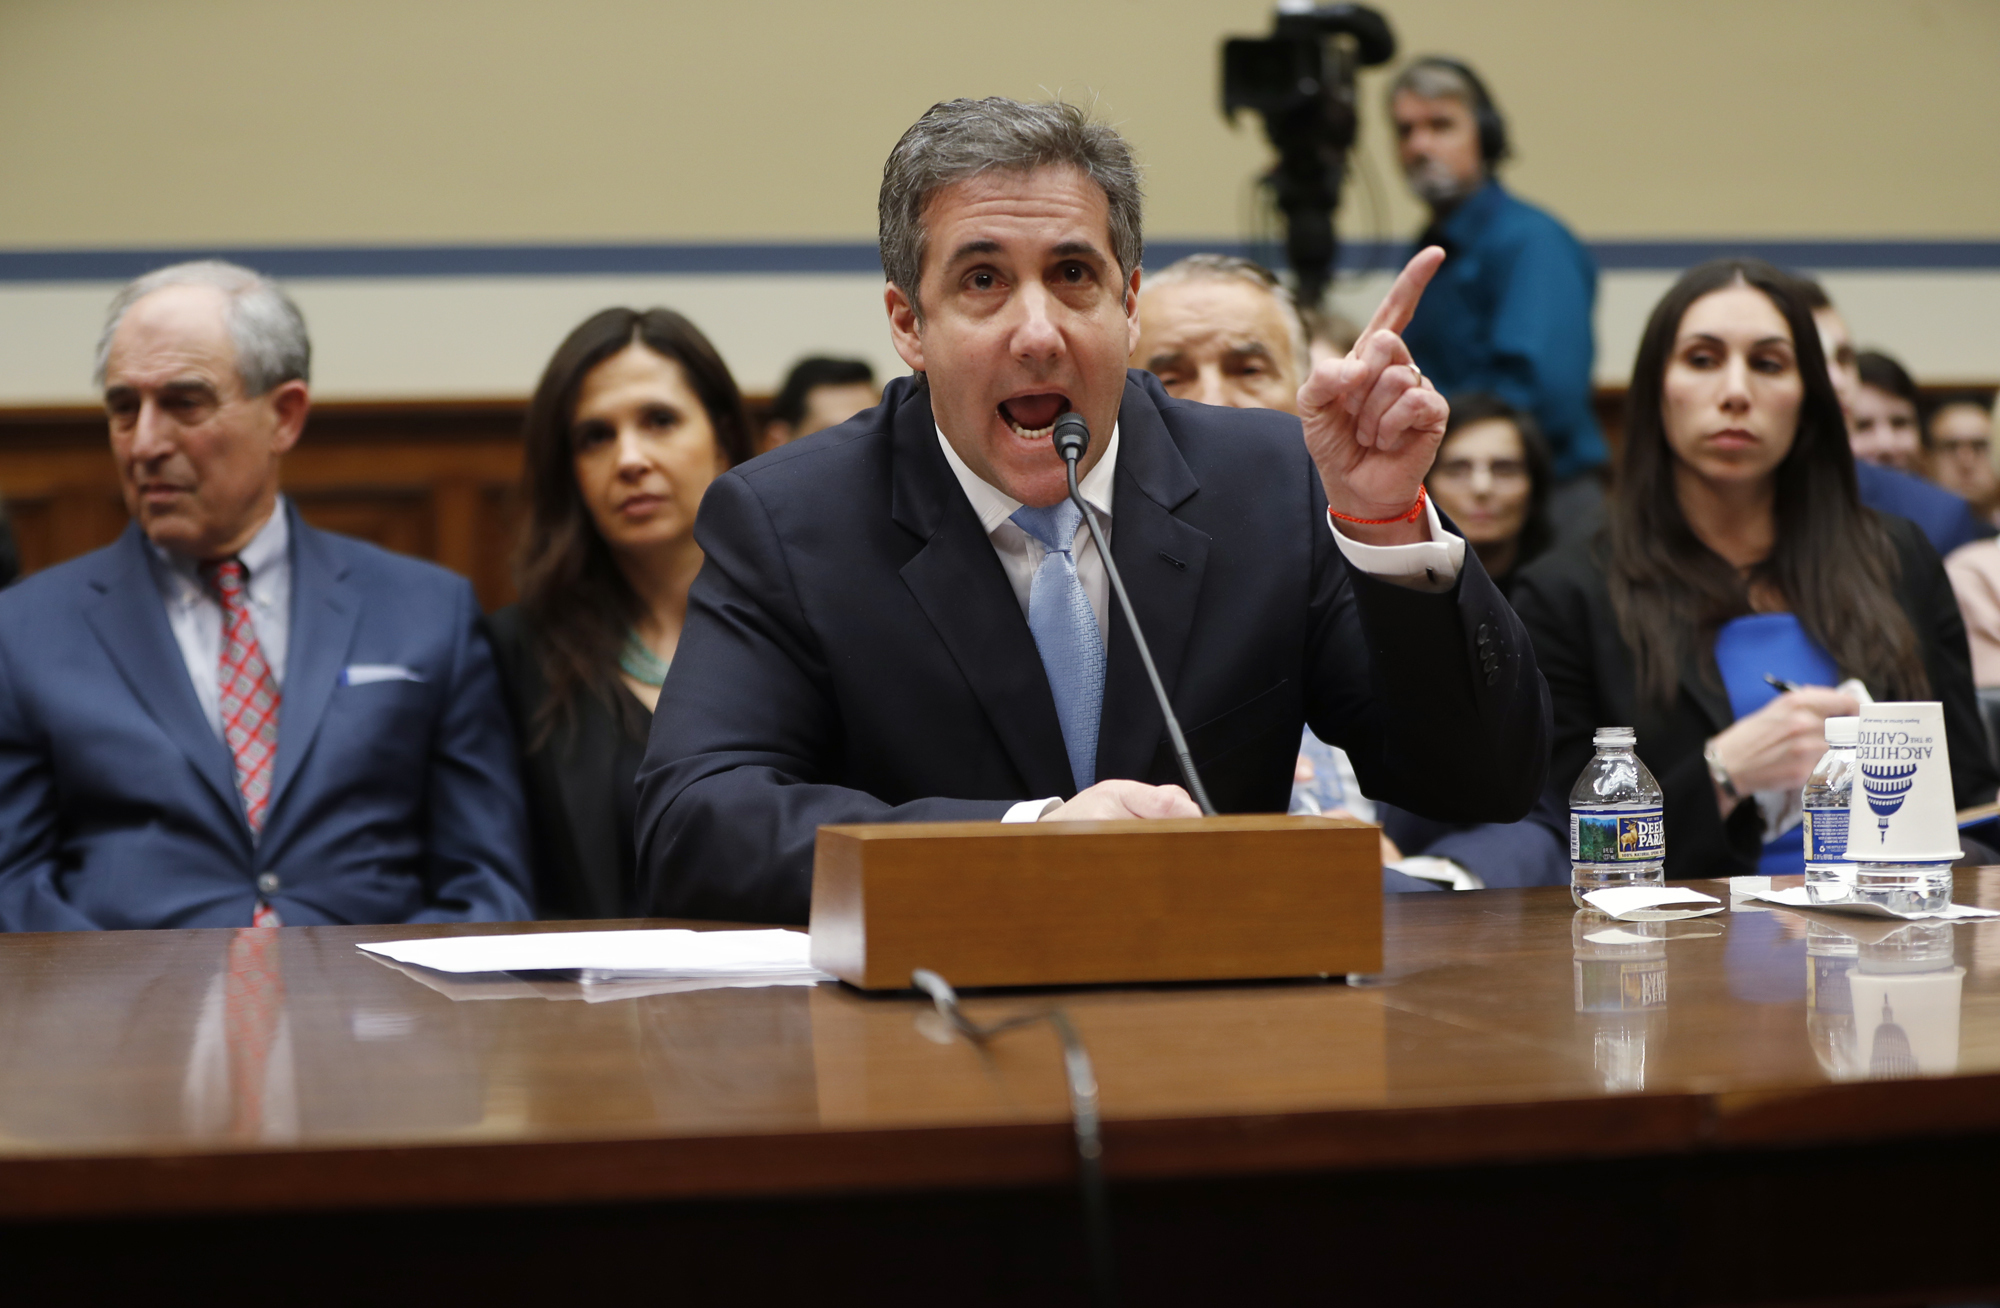 Michael Cohen, President Donald Trump's former personal lawyer, testifies before the House Oversight and Reform Committee on Capitol Hill in Washington, Feb. 27, 2019